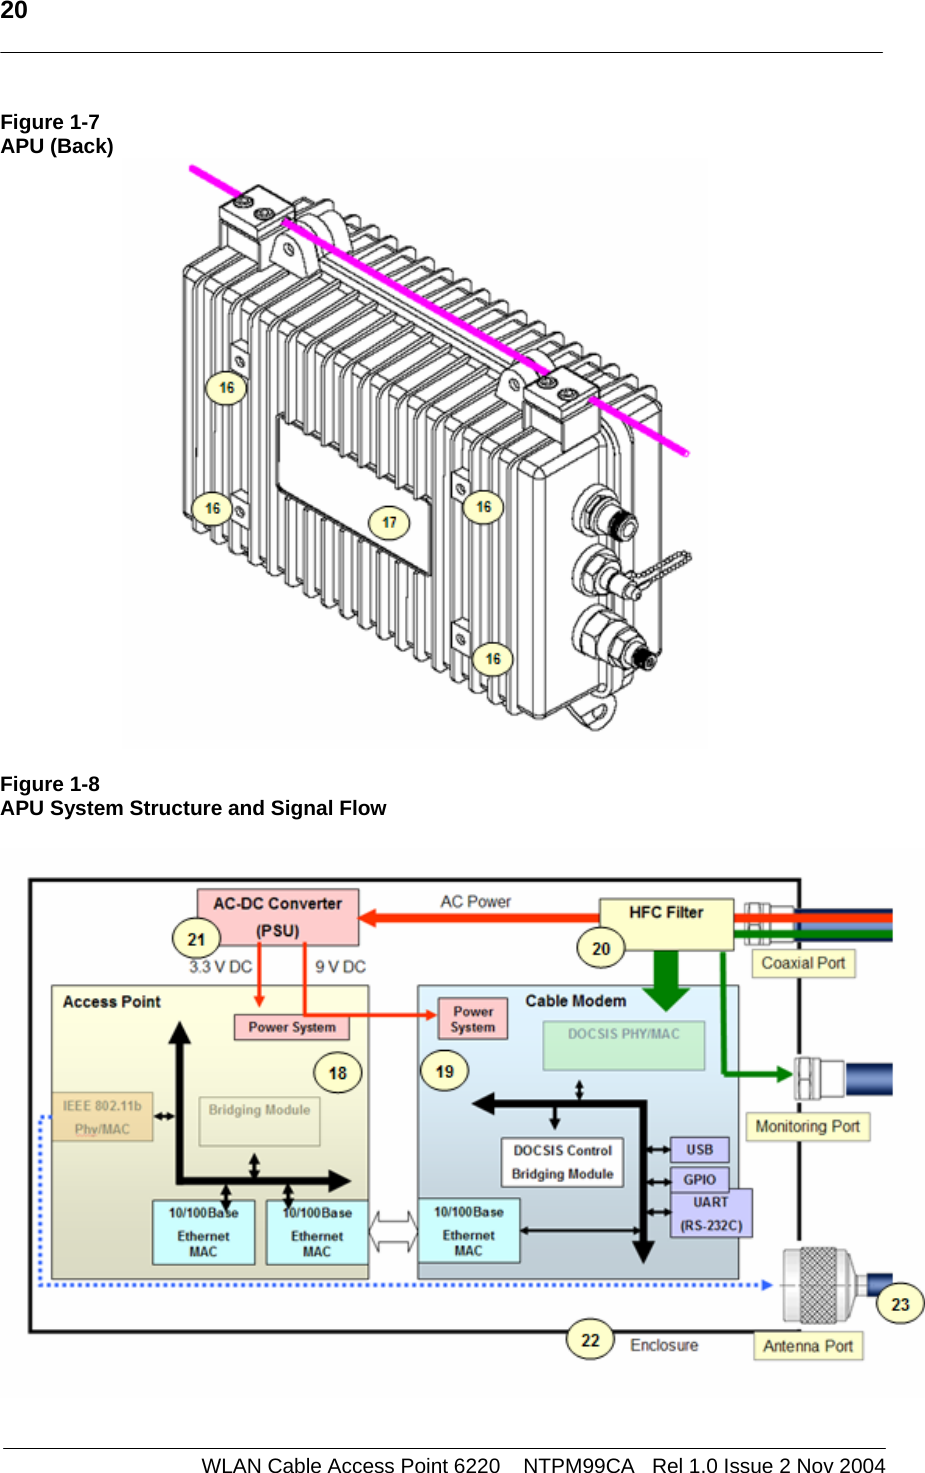   20     WLAN Cable Access Point 6220    NTPM99CA   Rel 1.0 Issue 2 Nov 2004 Figure 1-7 APU (Back)   Figure 1-8 APU System Structure and Signal Flow    